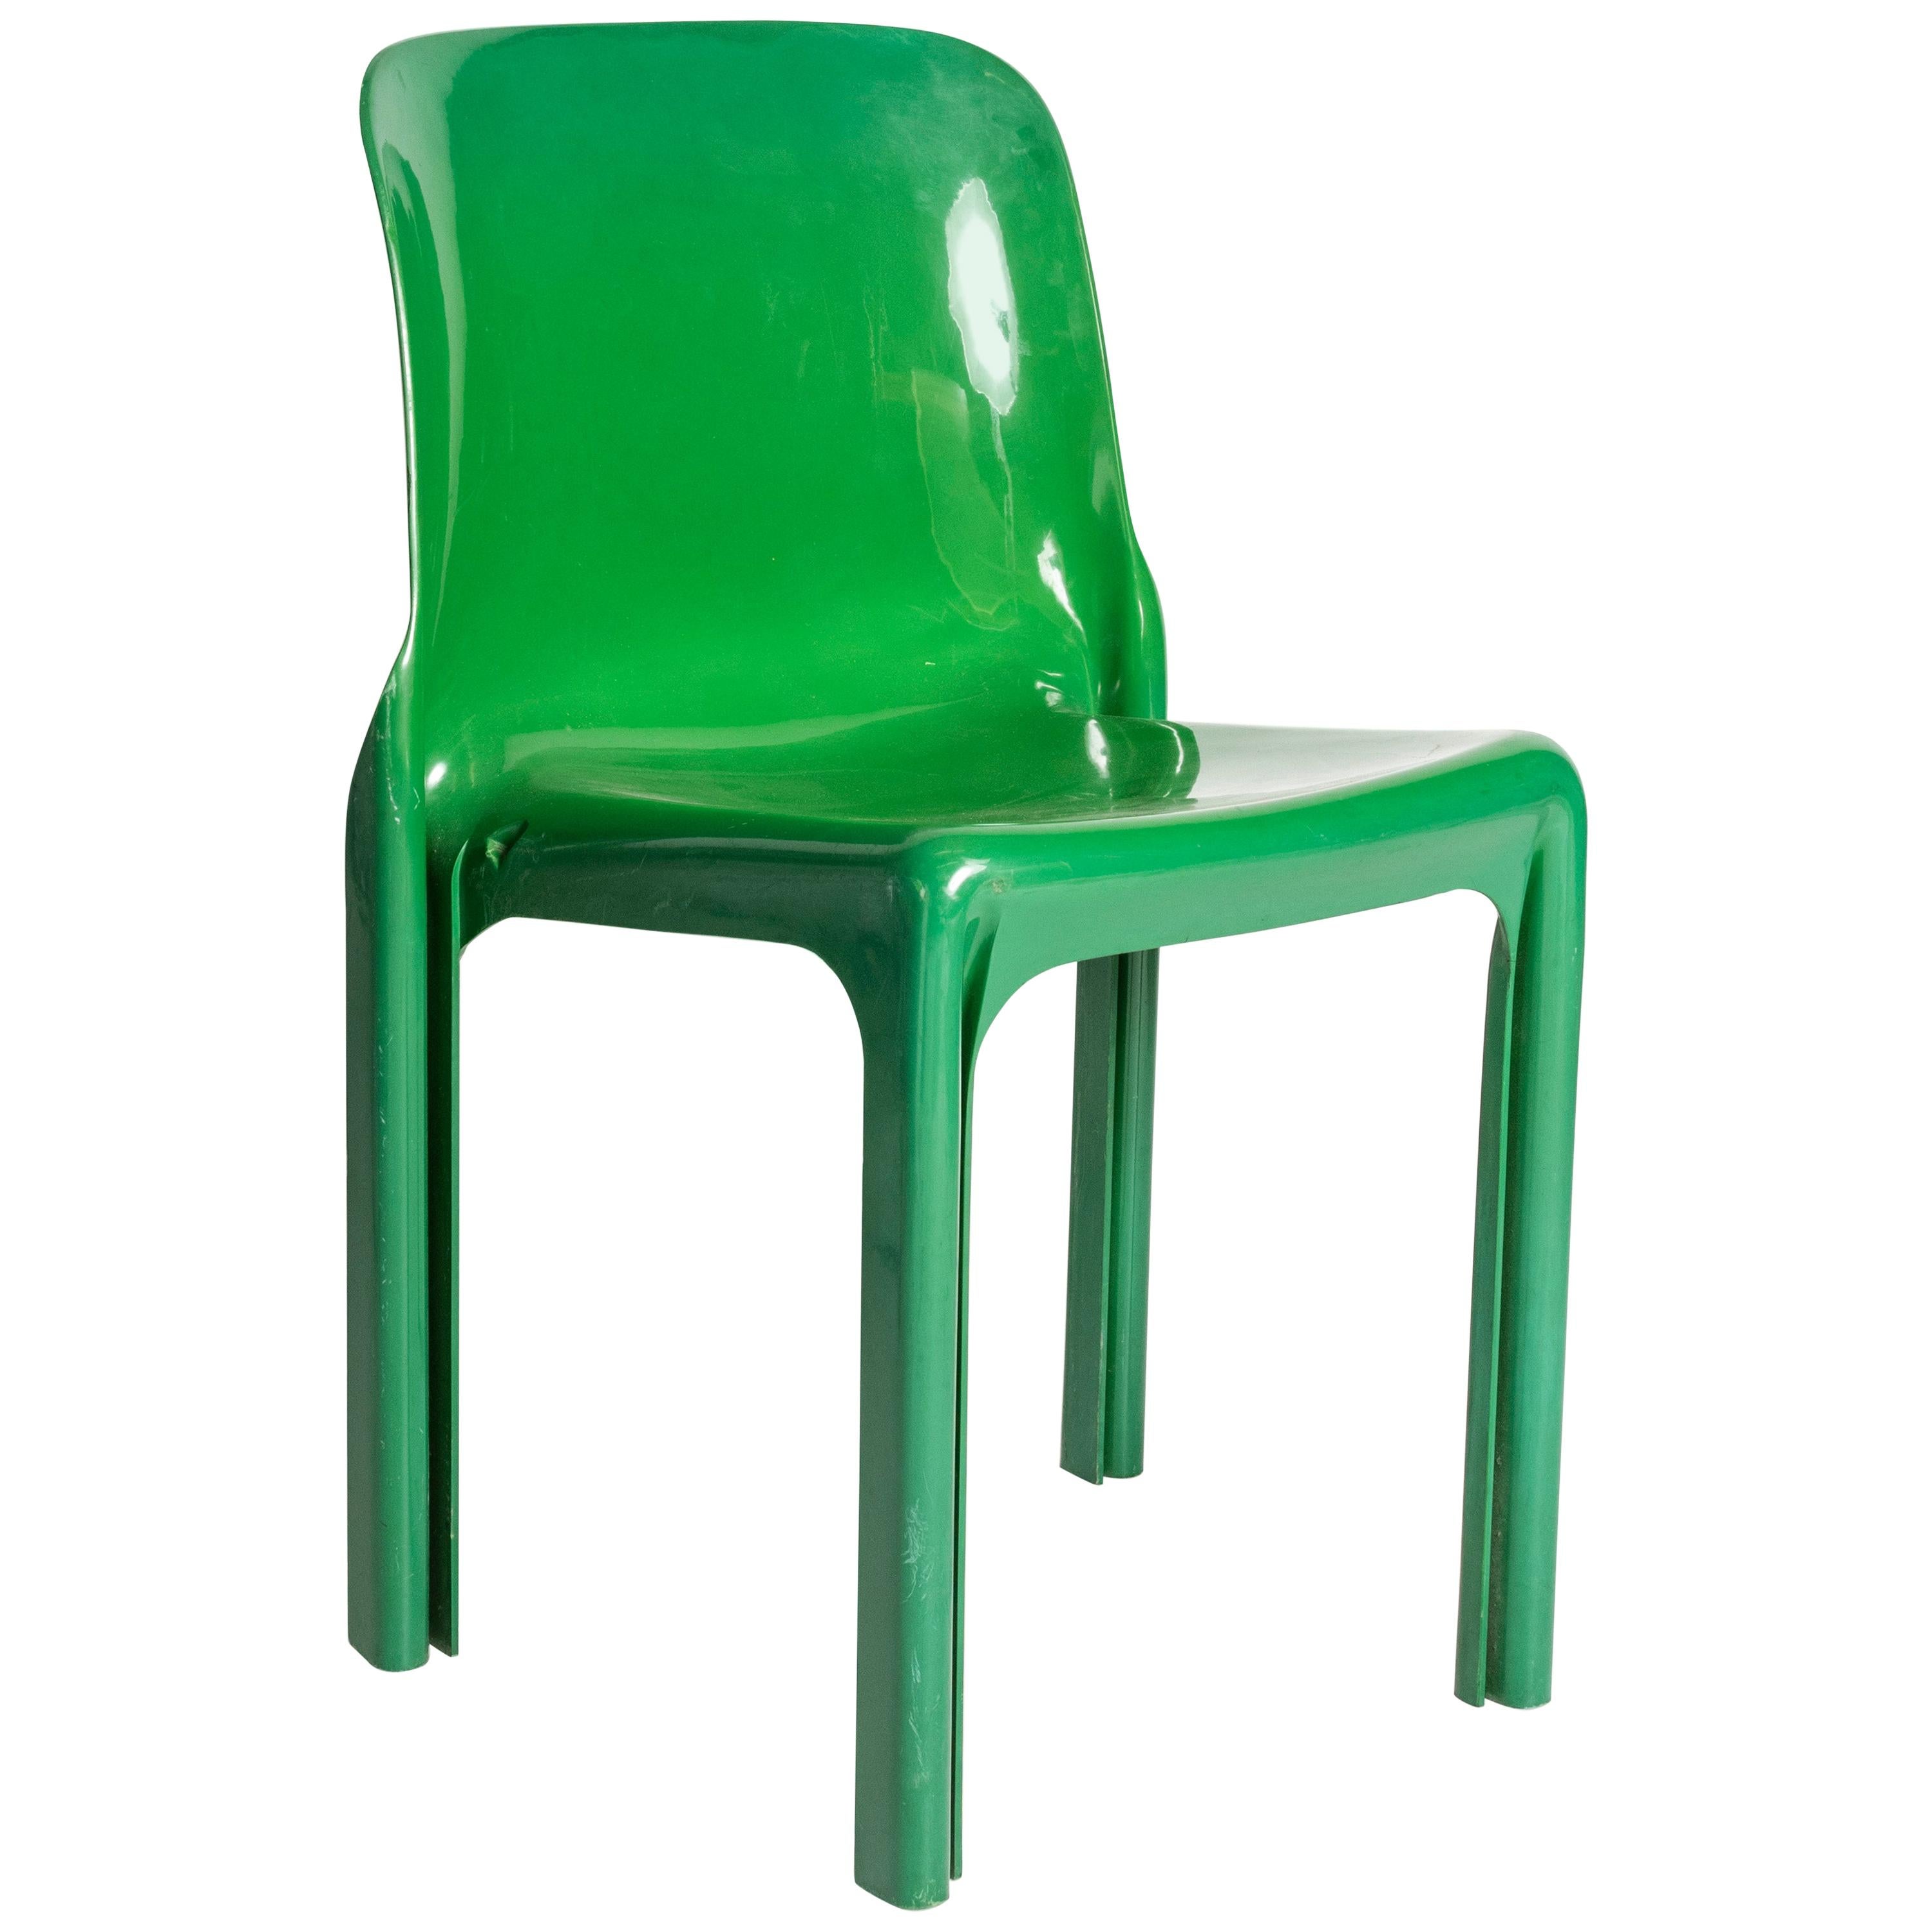 Italian Chair by Vico Magistretti for Artemide, Green Selene Chair, Italy, 1960s For Sale